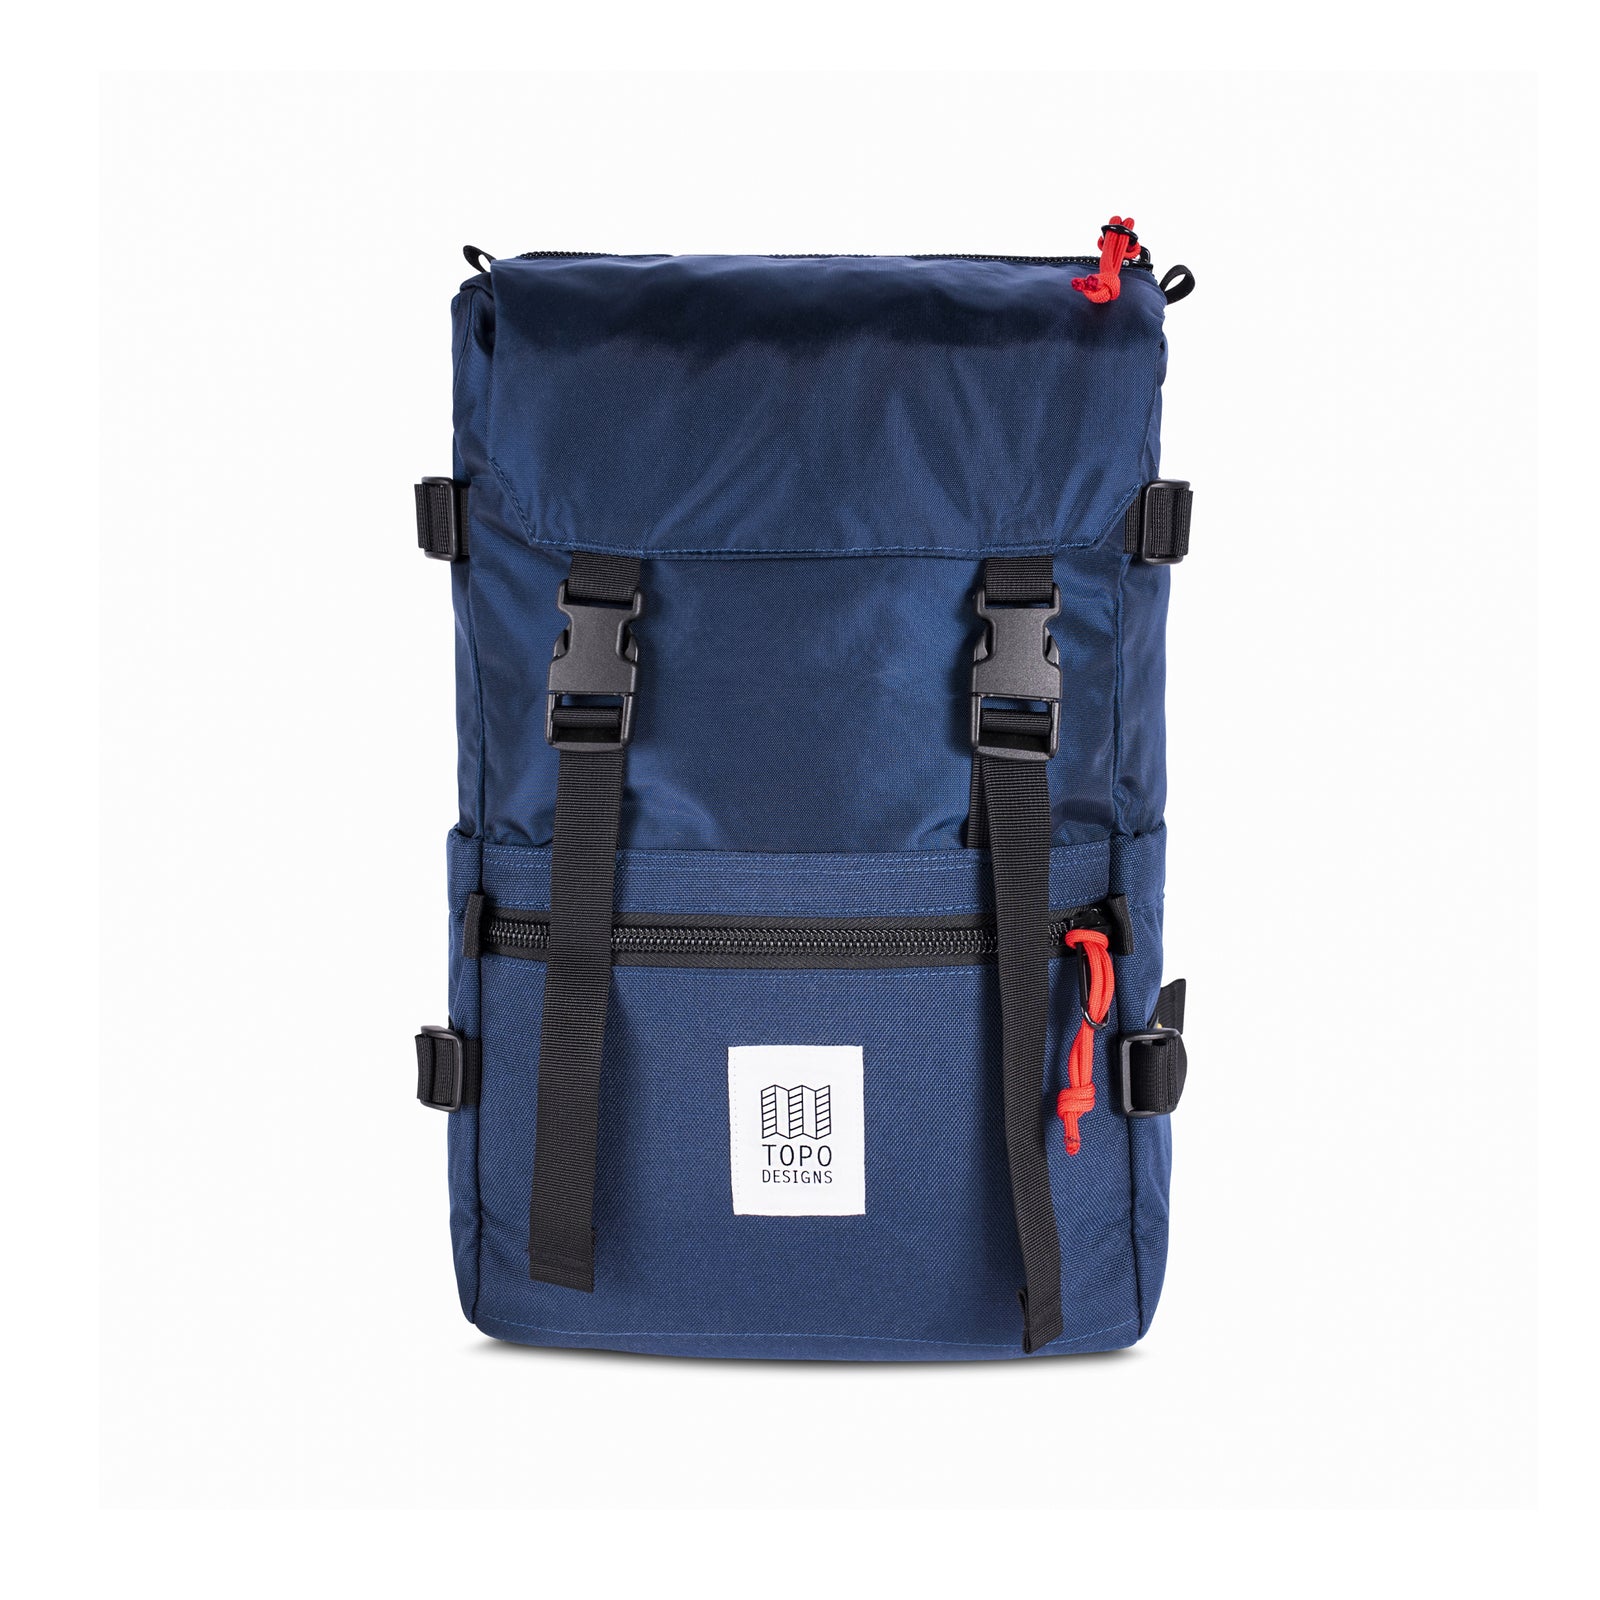 Front Product Shot of the Topo Designs Rover Pack Classic in "Navy" blue.